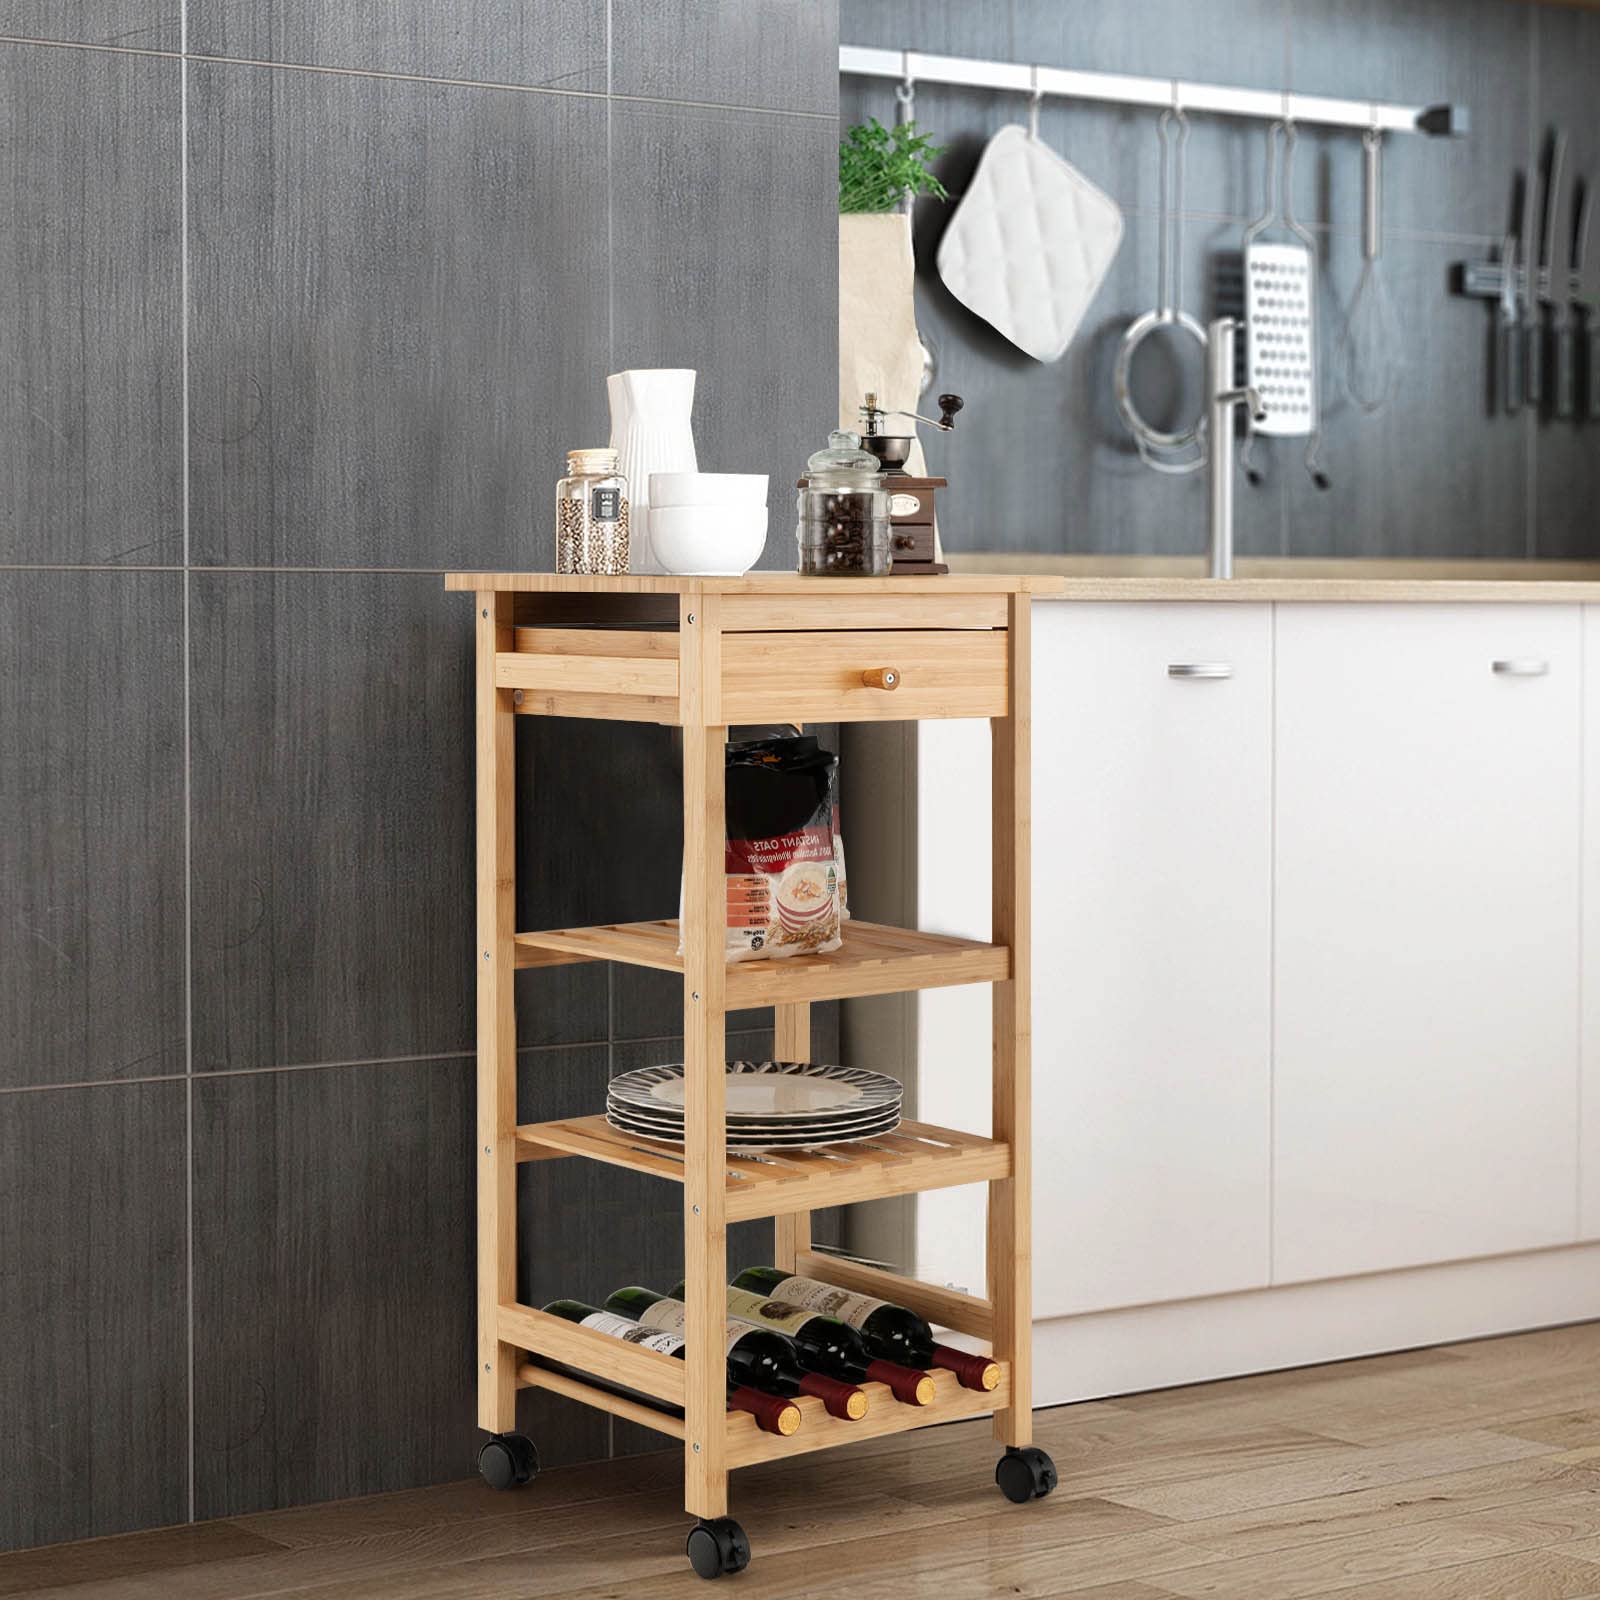 Giantex Kitchen Island on Wheels, Rolling Bamboo Kitchen Trolley with Drawer, 2 Open Storage Shelves, Wine Rack, 4 Lockable Casters